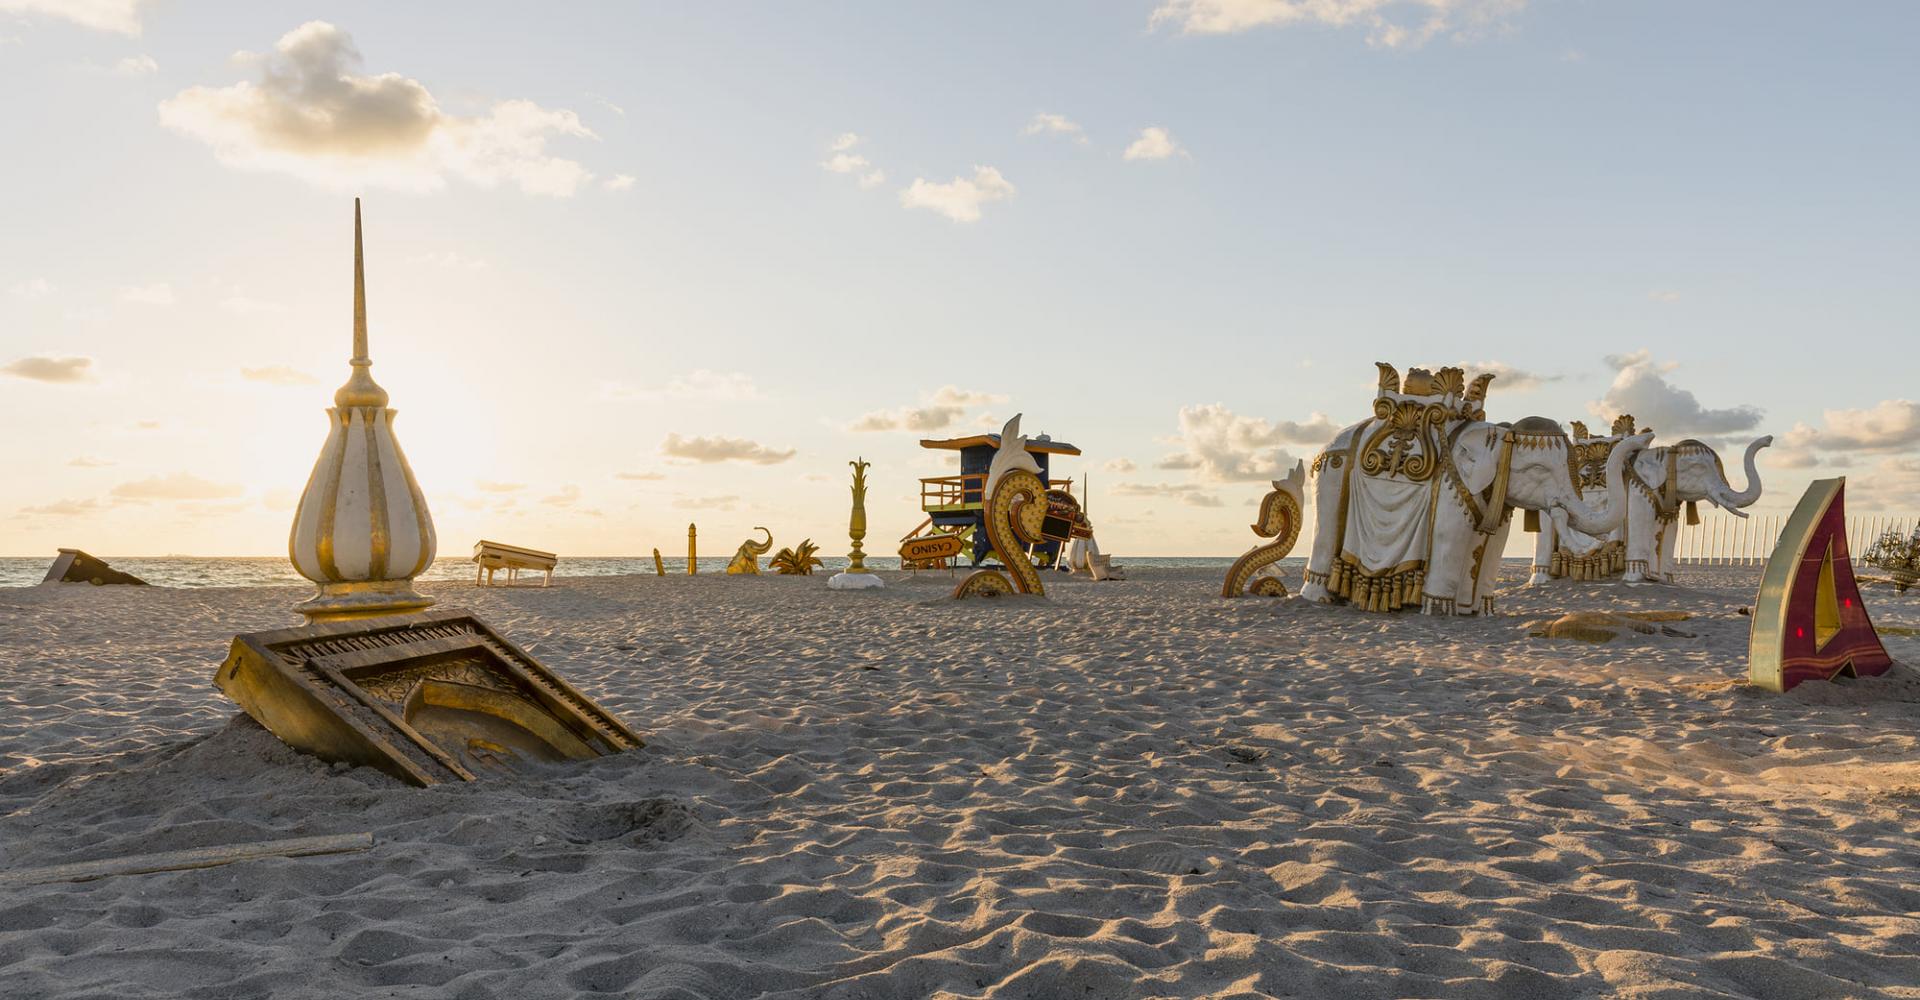 A collection of giant pieces from the abandoned Taj Mahal casino placed on the beach